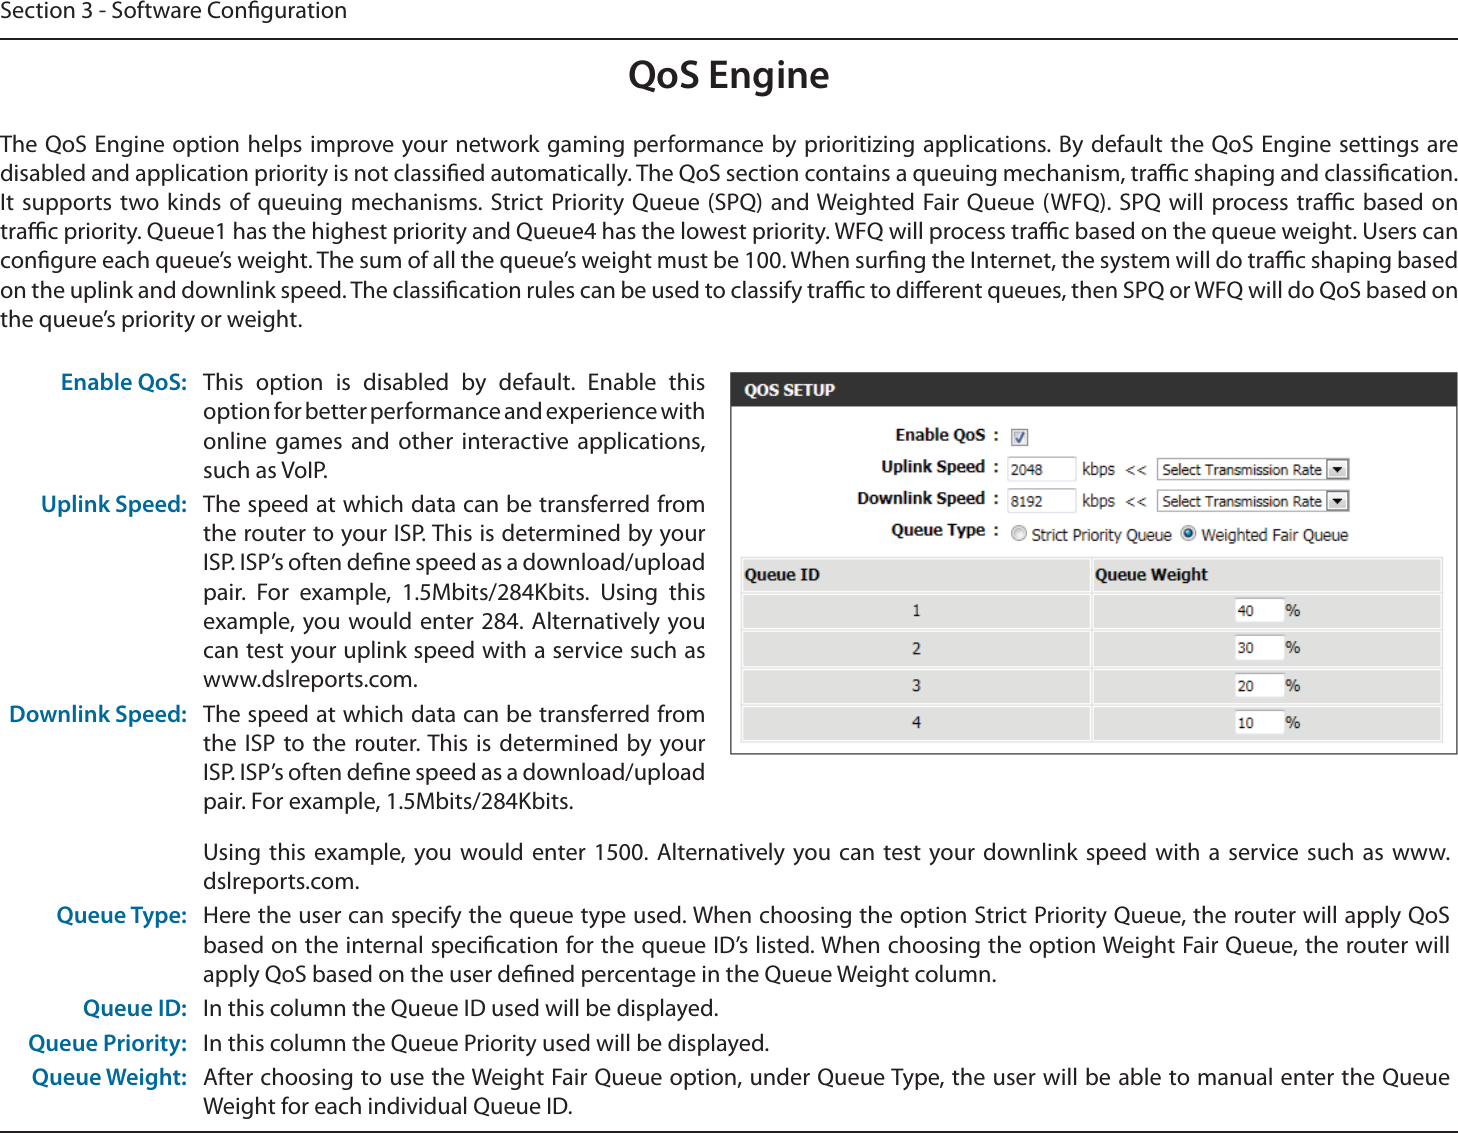 Section 3 - Software CongurationQoS EngineThe QoS Engine option helps improve your network gaming performance by prioritizing applications. By default the QoS Engine settings are disabled and application priority is not classied automatically. The QoS section contains a queuing mechanism, trac shaping and classication. It supports two kinds of queuing mechanisms. Strict Priority Queue (SPQ) and Weighted Fair Queue (WFQ). SPQ will process trac based on trac priority. Queue1 has the highest priority and Queue4 has the lowest priority. WFQ will process trac based on the queue weight. Users can congure each queue’s weight. The sum of all the queue’s weight must be 100. When surng the Internet, the system will do trac shaping based on the uplink and downlink speed. The classication rules can be used to classify trac to dierent queues, then SPQ or WFQ will do QoS based on the queue’s priority or weight.Enable QoS: This option is disabled by default. Enable this option for better performance and experience with online games and other interactive applications, such as VoIP.Uplink Speed: The speed at which data can be transferred from the router to your ISP. This is determined by your ISP. ISP’s often dene speed as a download/upload pair. For example, 1.5Mbits/284Kbits. Using this example, you would enter 284. Alternatively you can test your uplink speed with a service such as www.dslreports.com.Downlink Speed: The speed at which data can be transferred from the ISP to the router. This is determined by your ISP. ISP’s often dene speed as a download/upload pair. For example, 1.5Mbits/284Kbits. Using this example, you would enter 1500. Alternatively you can test your downlink speed with a service such as www.dslreports.com.Queue Type: Here the user can specify the queue type used. When choosing the option Strict Priority Queue, the router will apply QoS based on the internal specication for the queue ID’s listed. When choosing the option Weight Fair Queue, the router will apply QoS based on the user dened percentage in the Queue Weight column.Queue ID: In this column the Queue ID used will be displayed.Queue Priority: In this column the Queue Priority used will be displayed.Queue Weight: After choosing to use the Weight Fair Queue option, under Queue Type, the user will be able to manual enter the Queue Weight for each individual Queue ID.